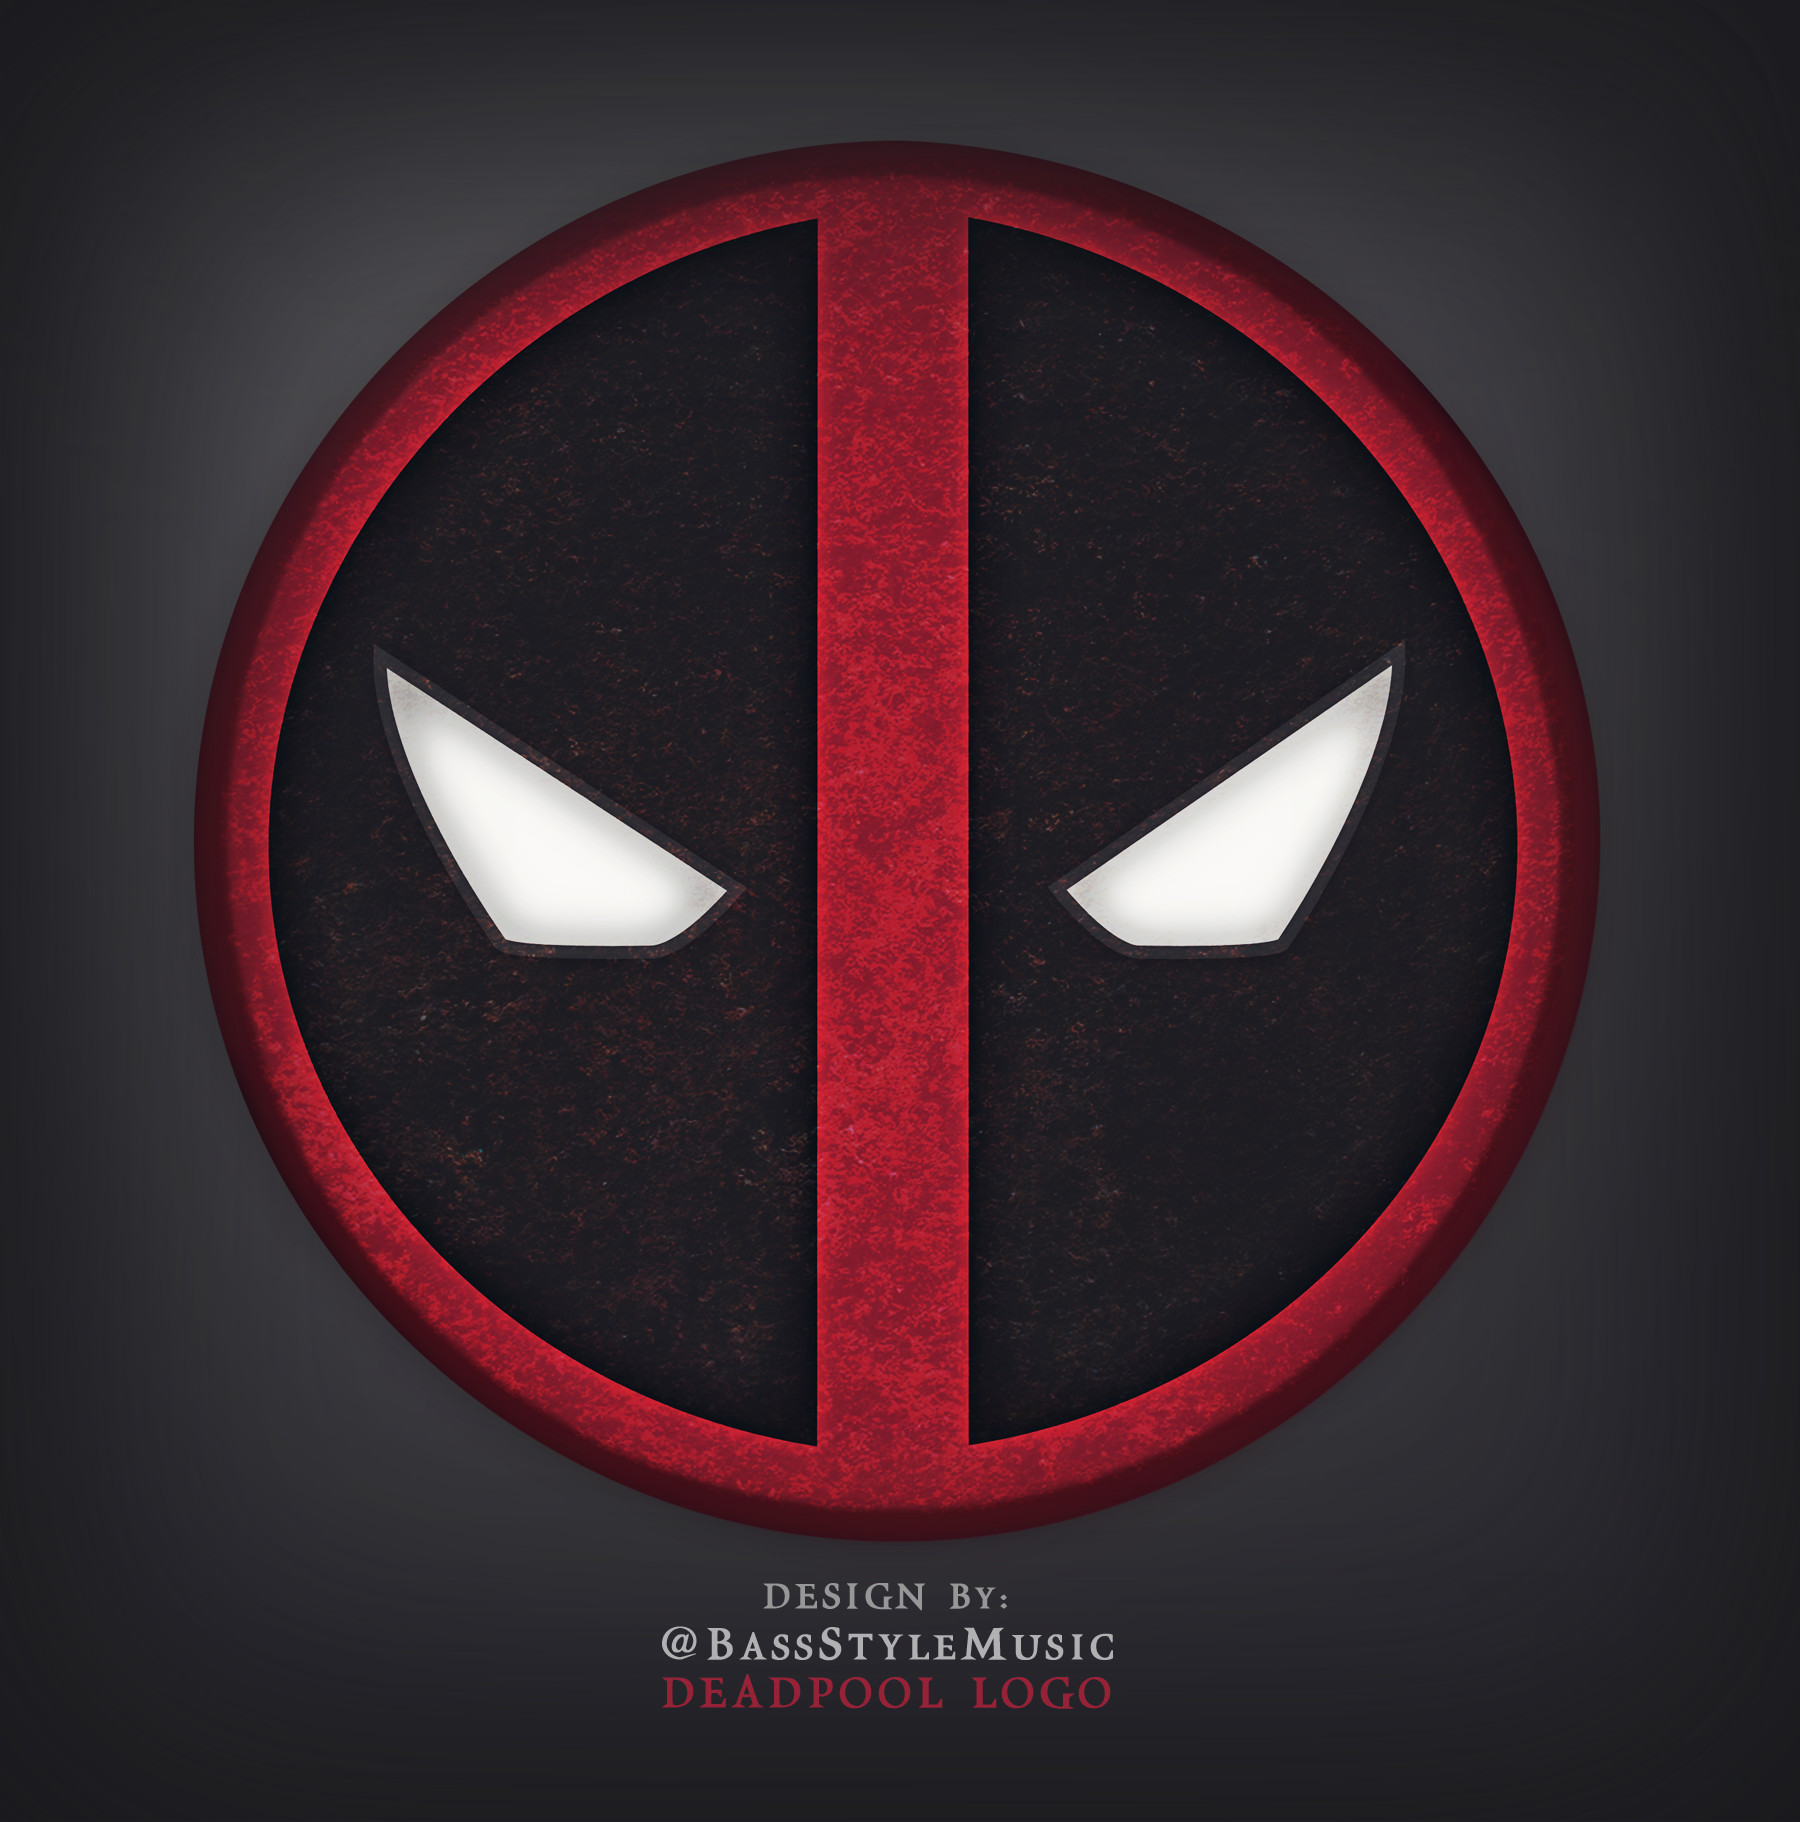 Deadpool textless movie poster Textless Movie posters & Artwork  #scififantasy movie posters #Horror movie post… | Deadpool wallpaper,  Deadpool artwork, Deadpool art